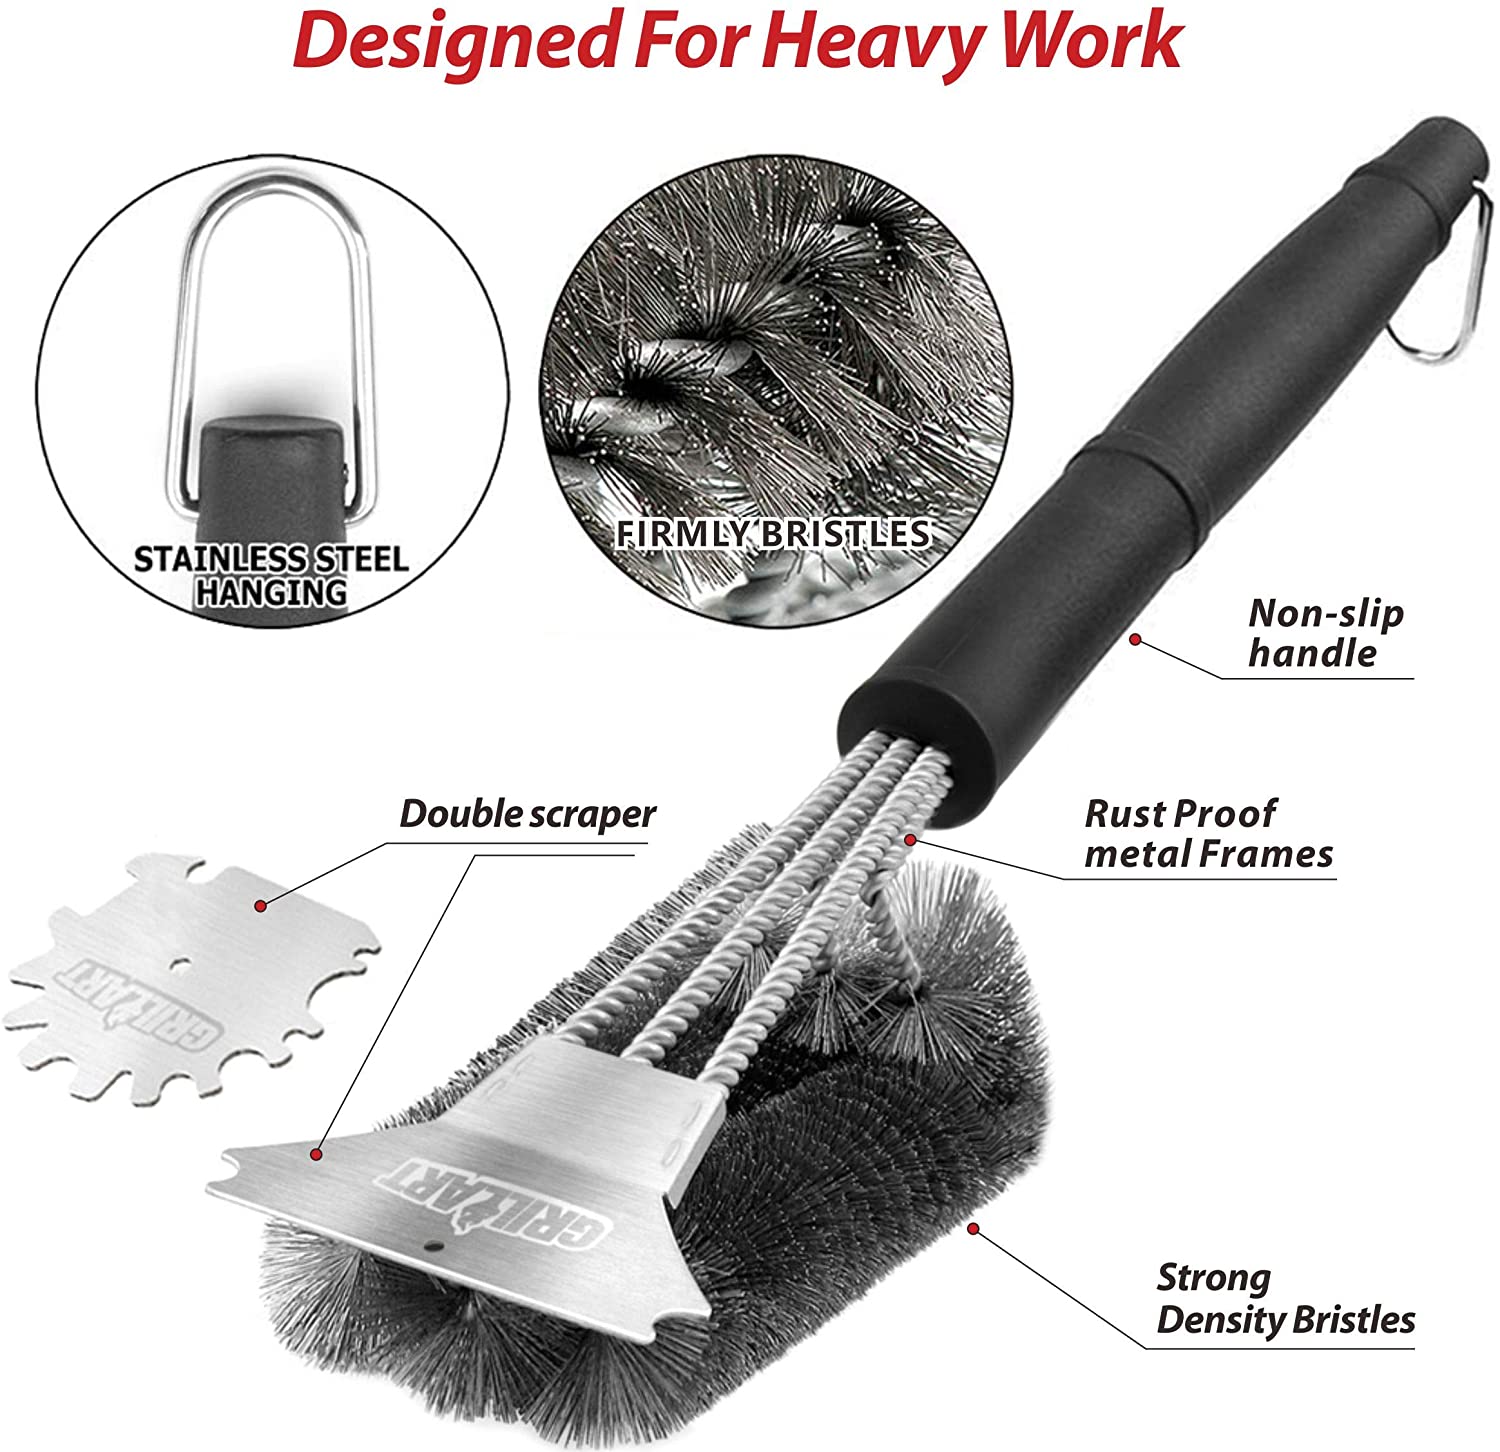  BBQ Grill Brush Stainless Steel 18 Barbecue Cleaning